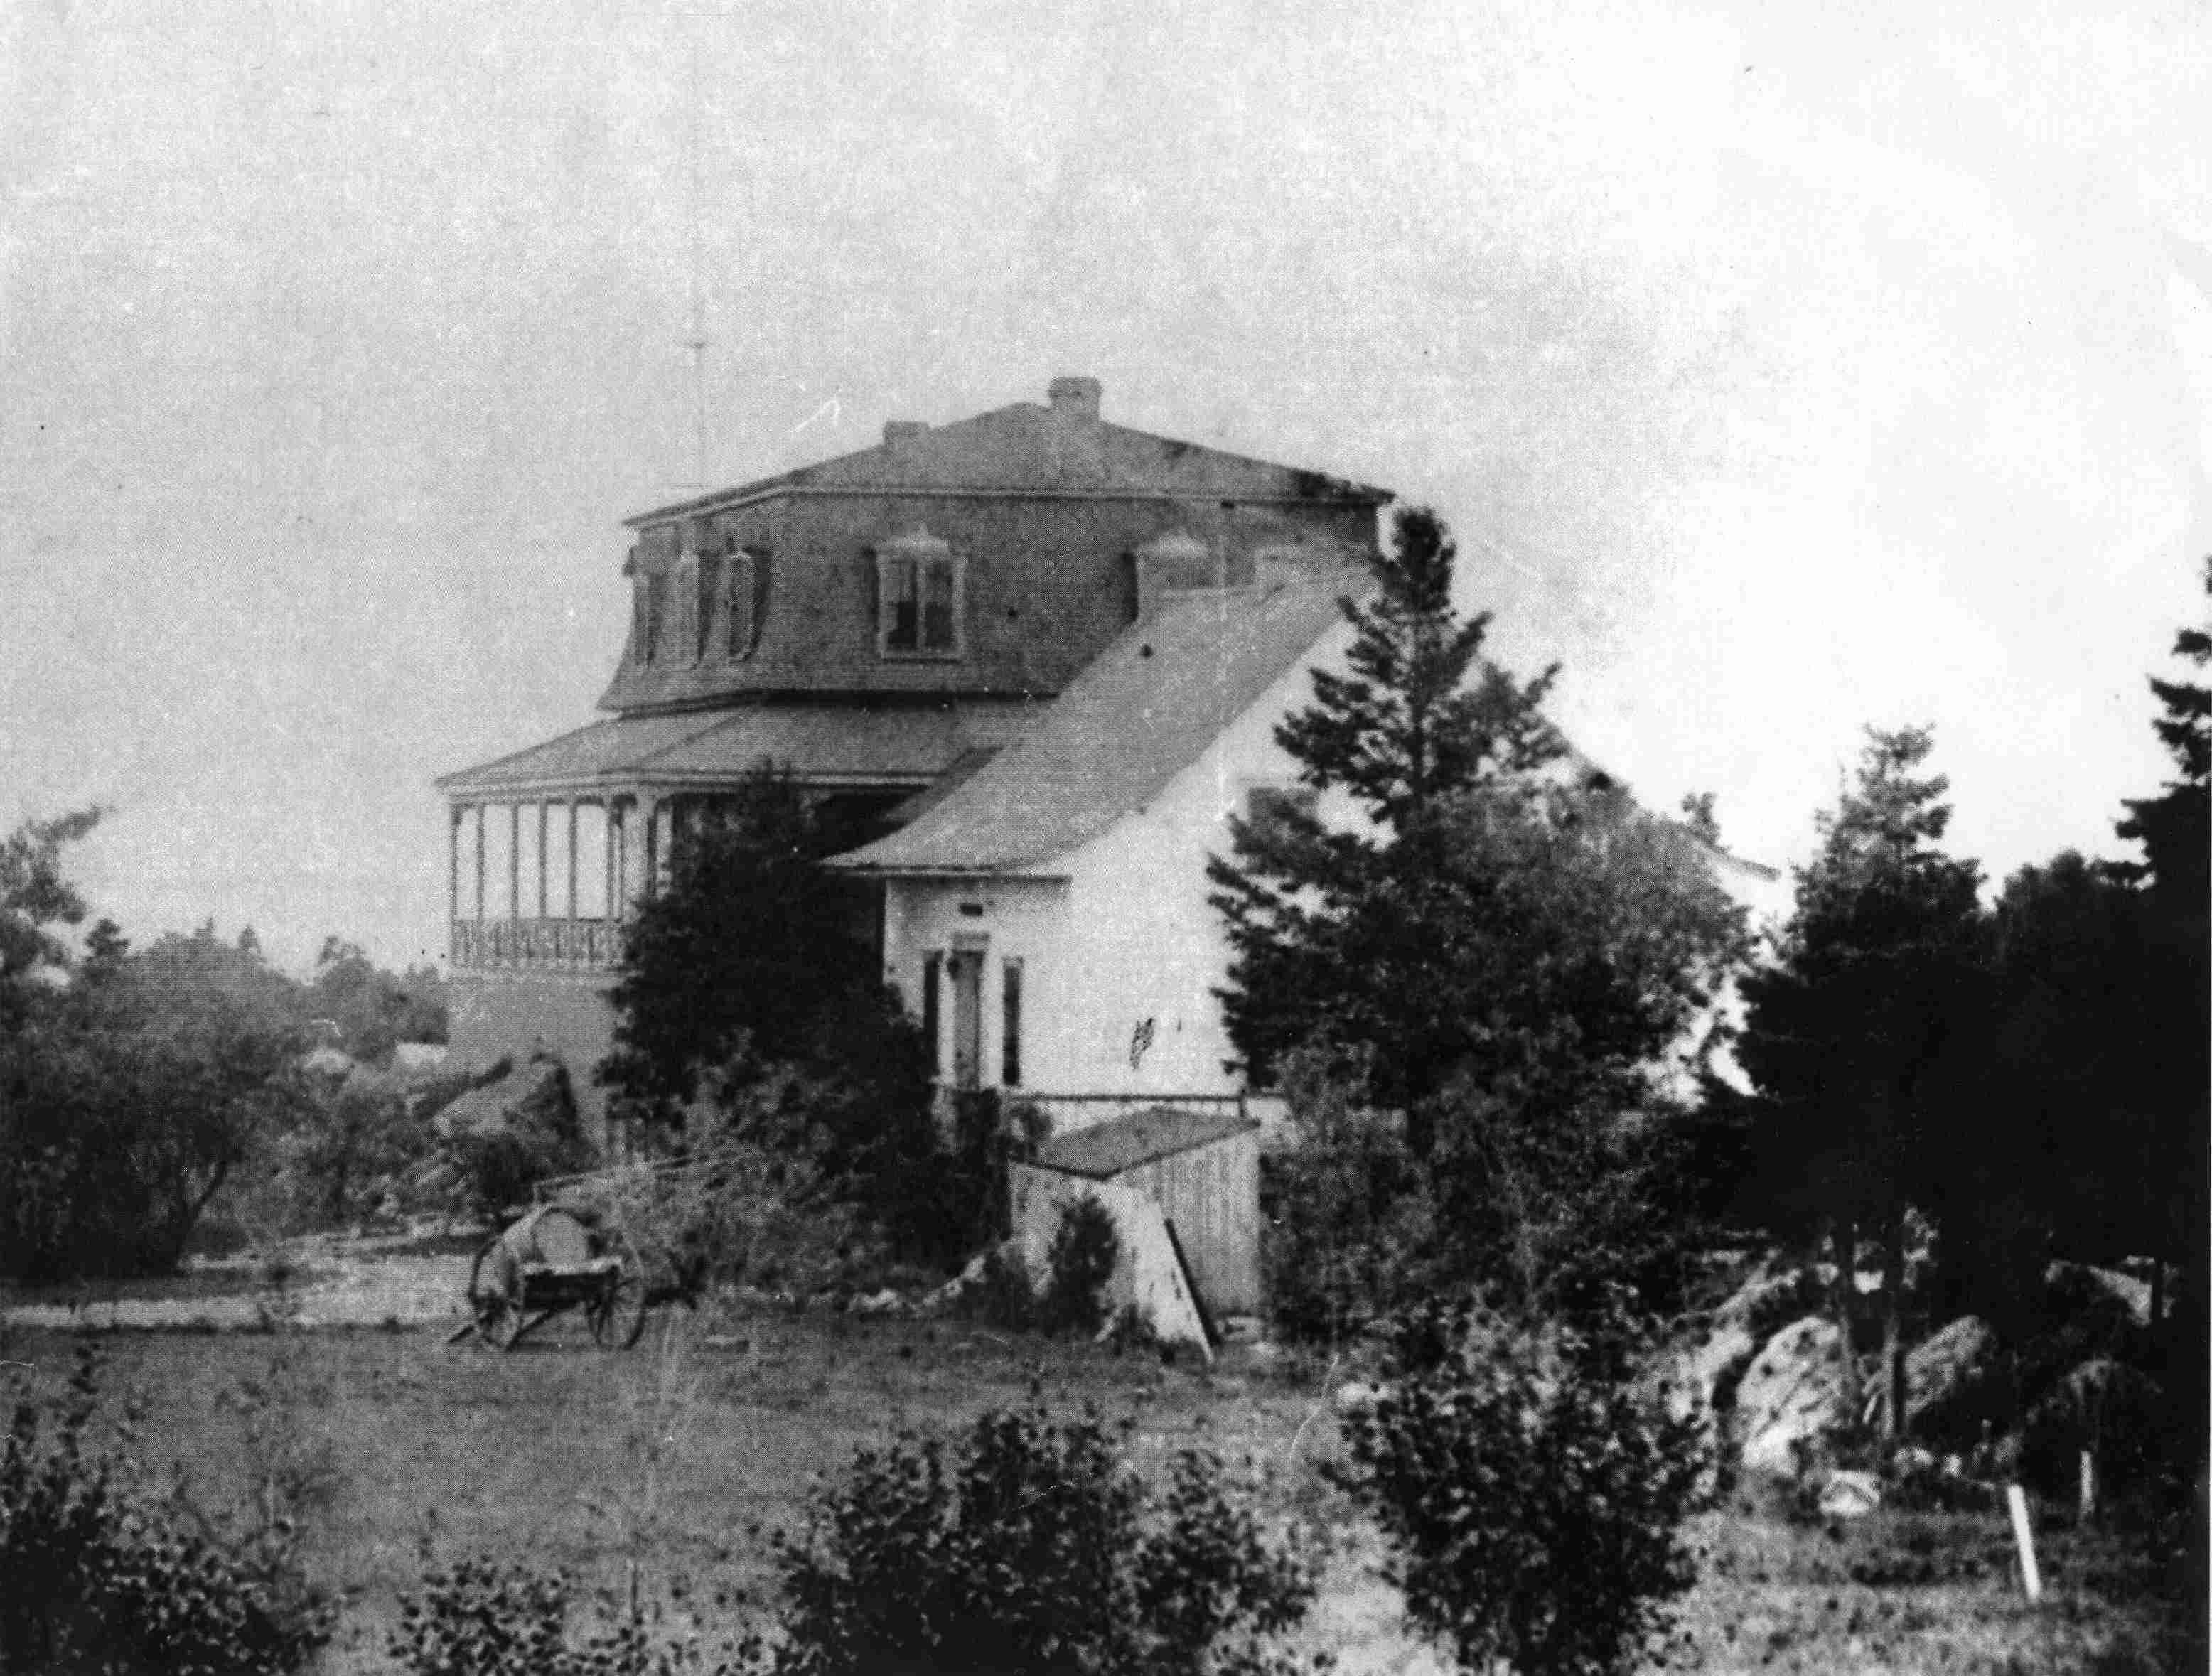 Old photograph of a country home surrounded by trees, with a cliff in the background.